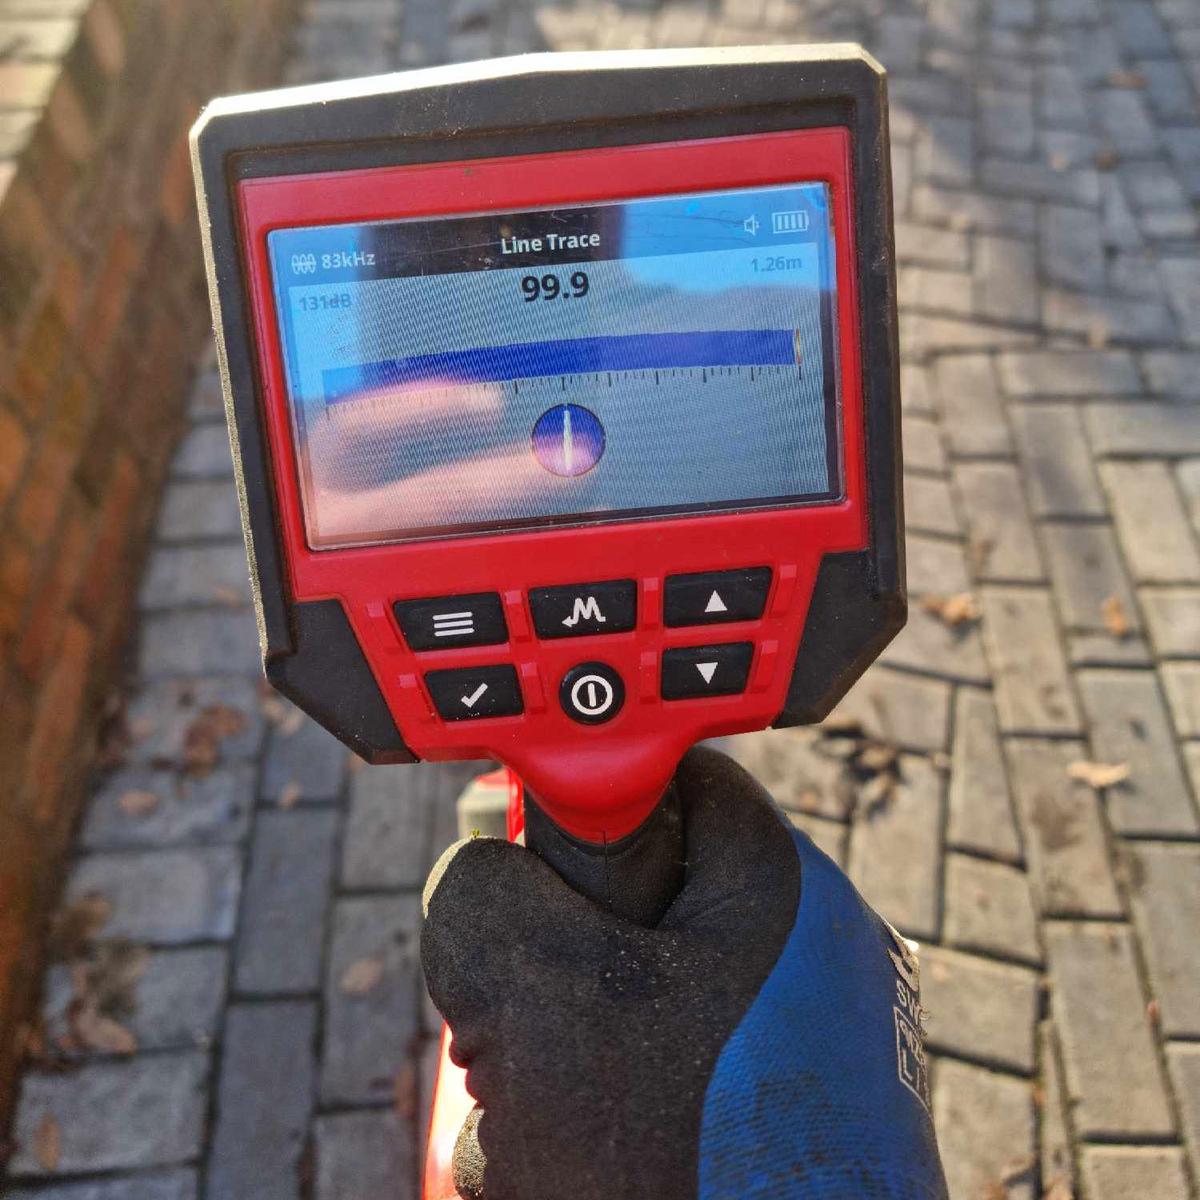 A photo of a drain engineer using a locator tool to map out a drainage system for maintenance.